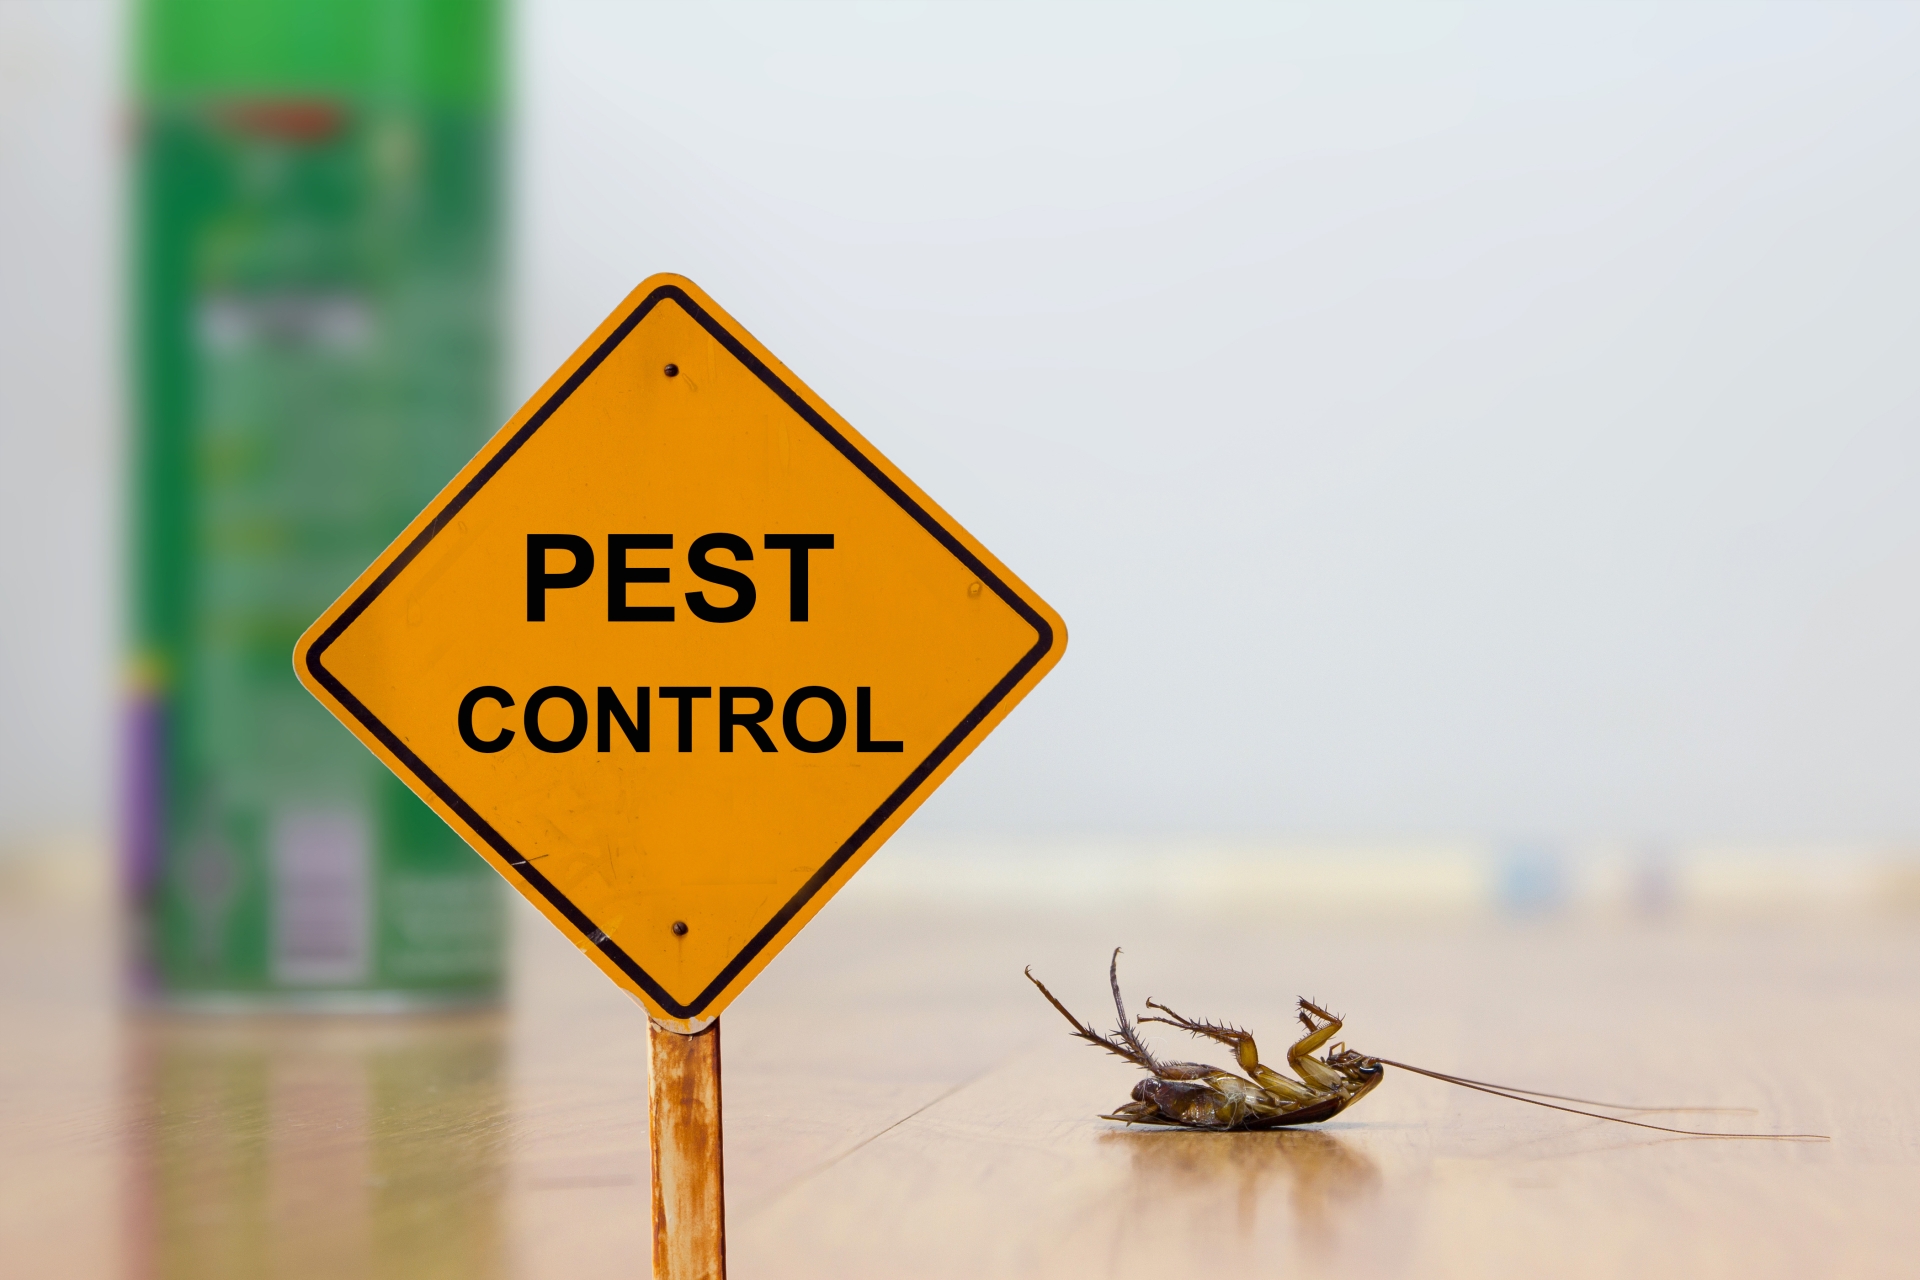 24 Hour Pest Control, Pest Control in Buckhurst Hill, IG9. Call Now 020 8166 9746